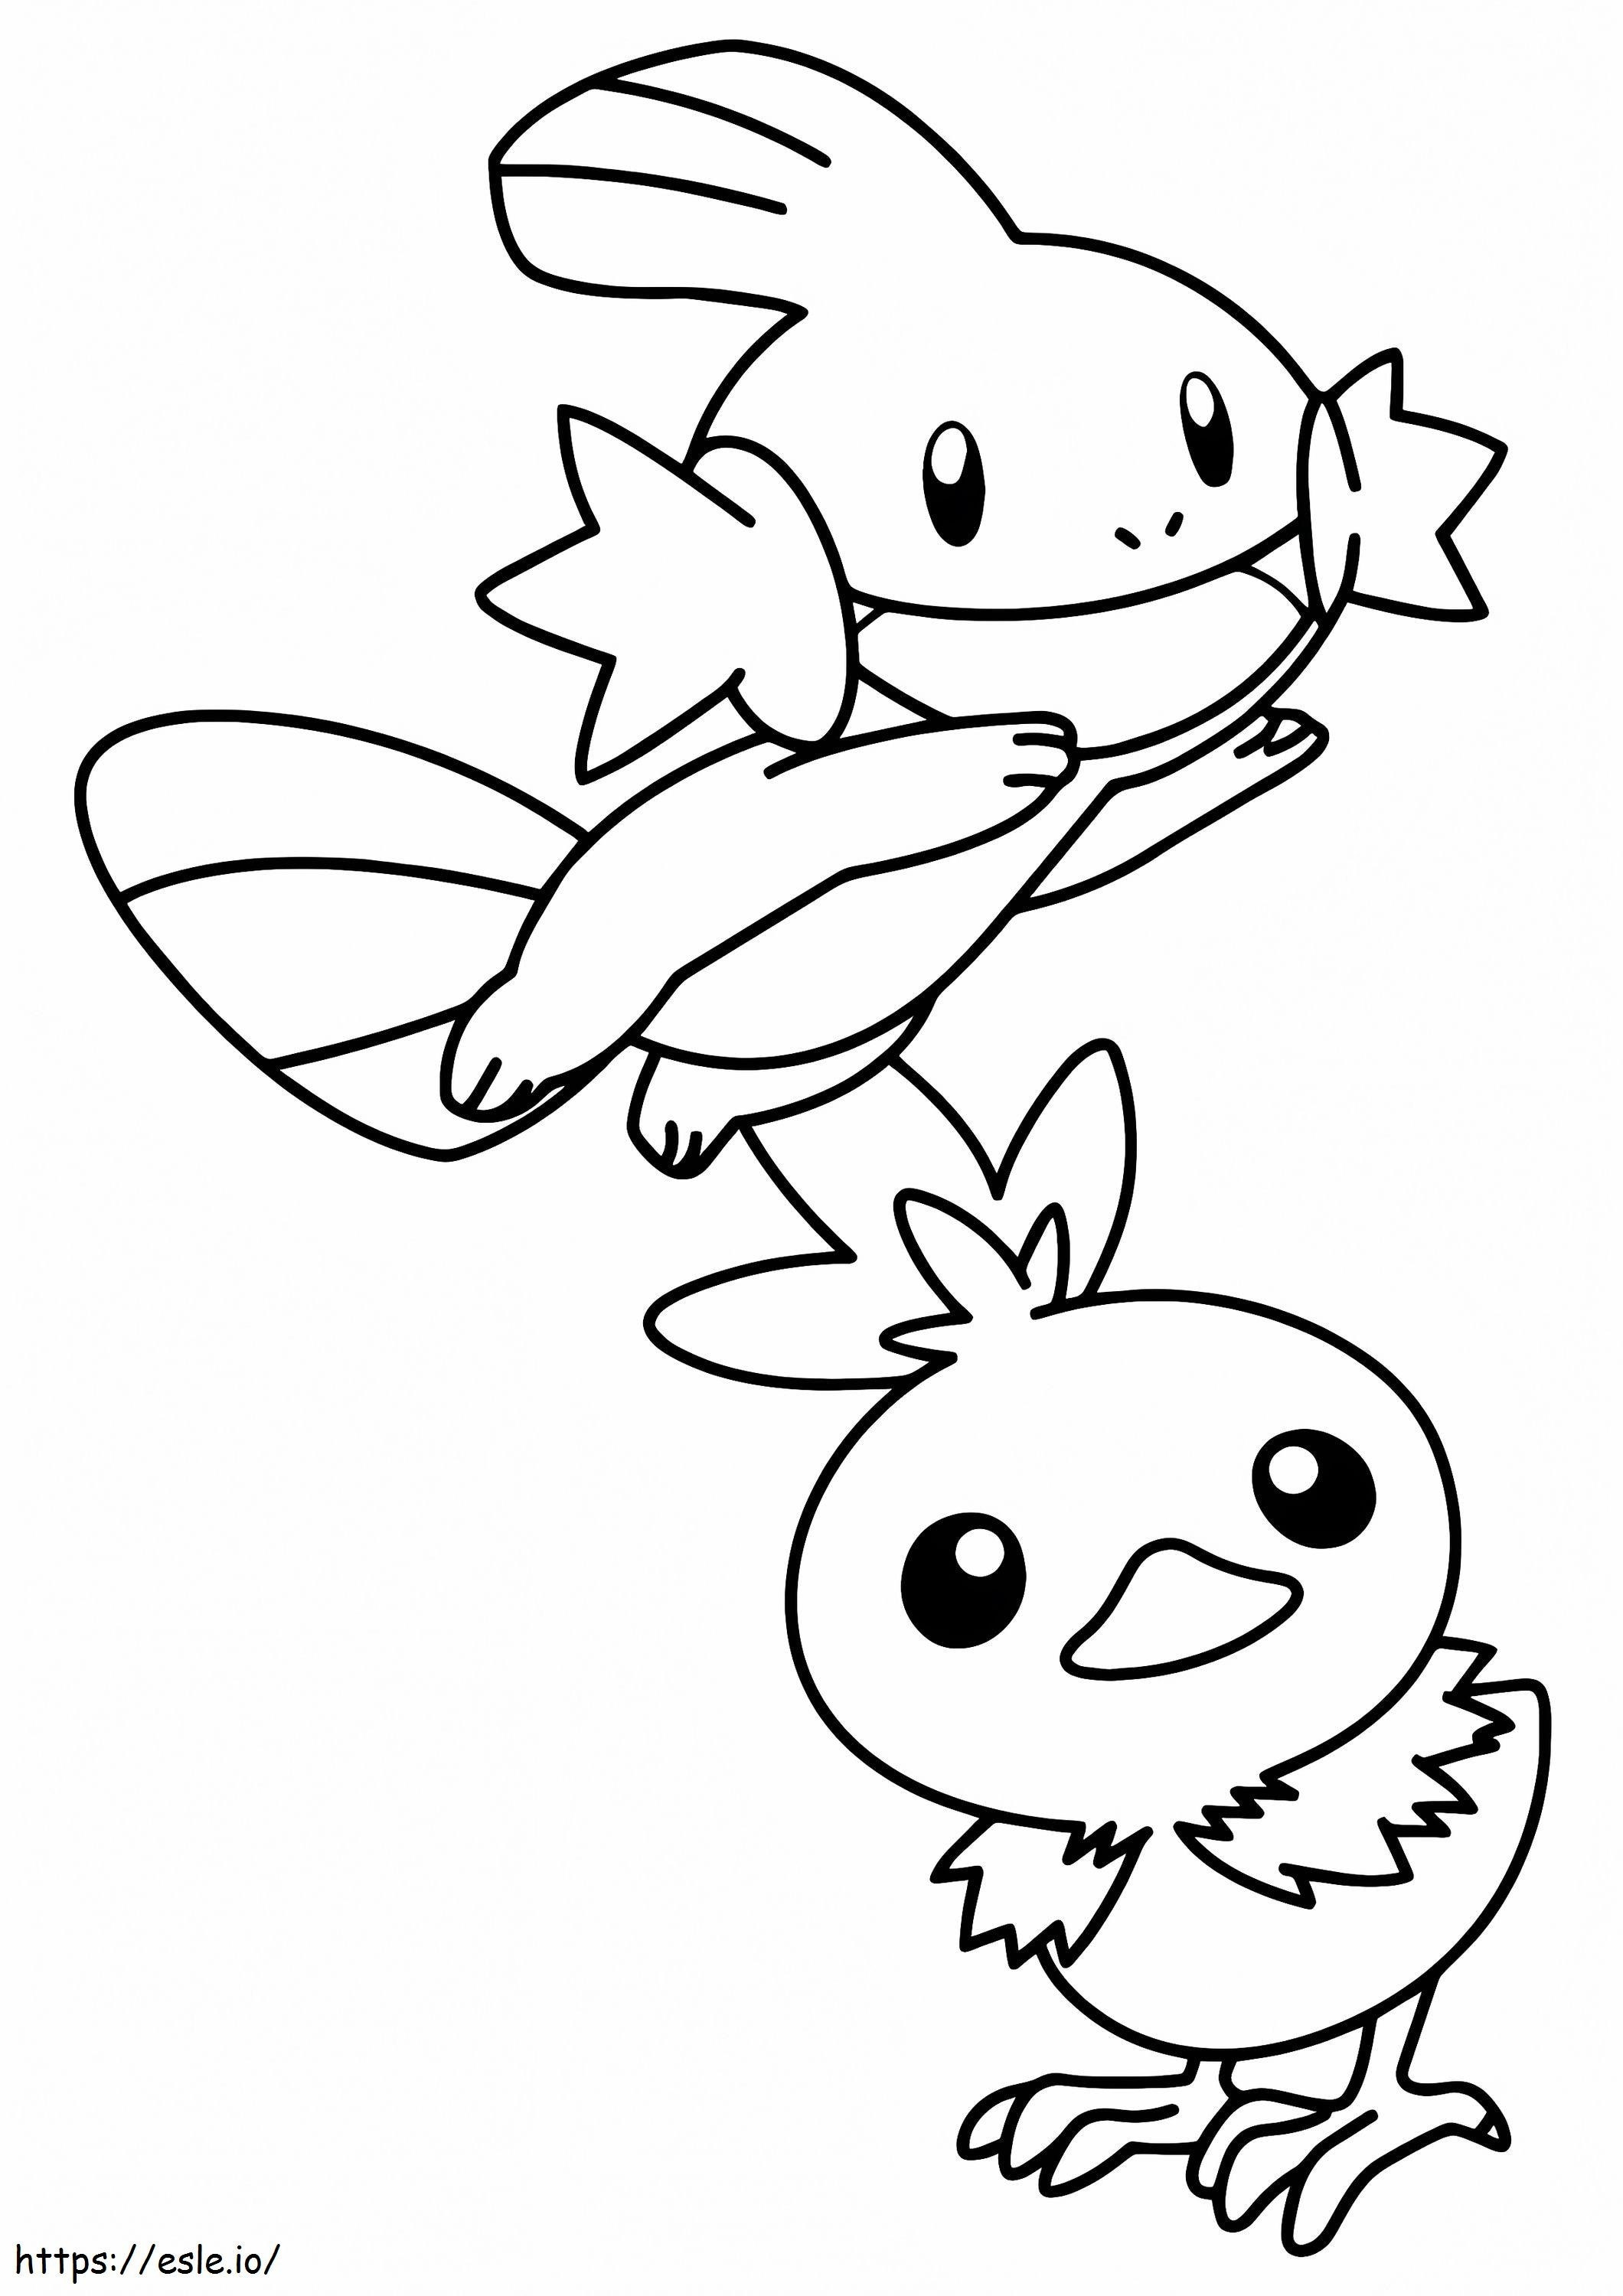 1528273519_Pokemon Coloring Pages A4 coloring page